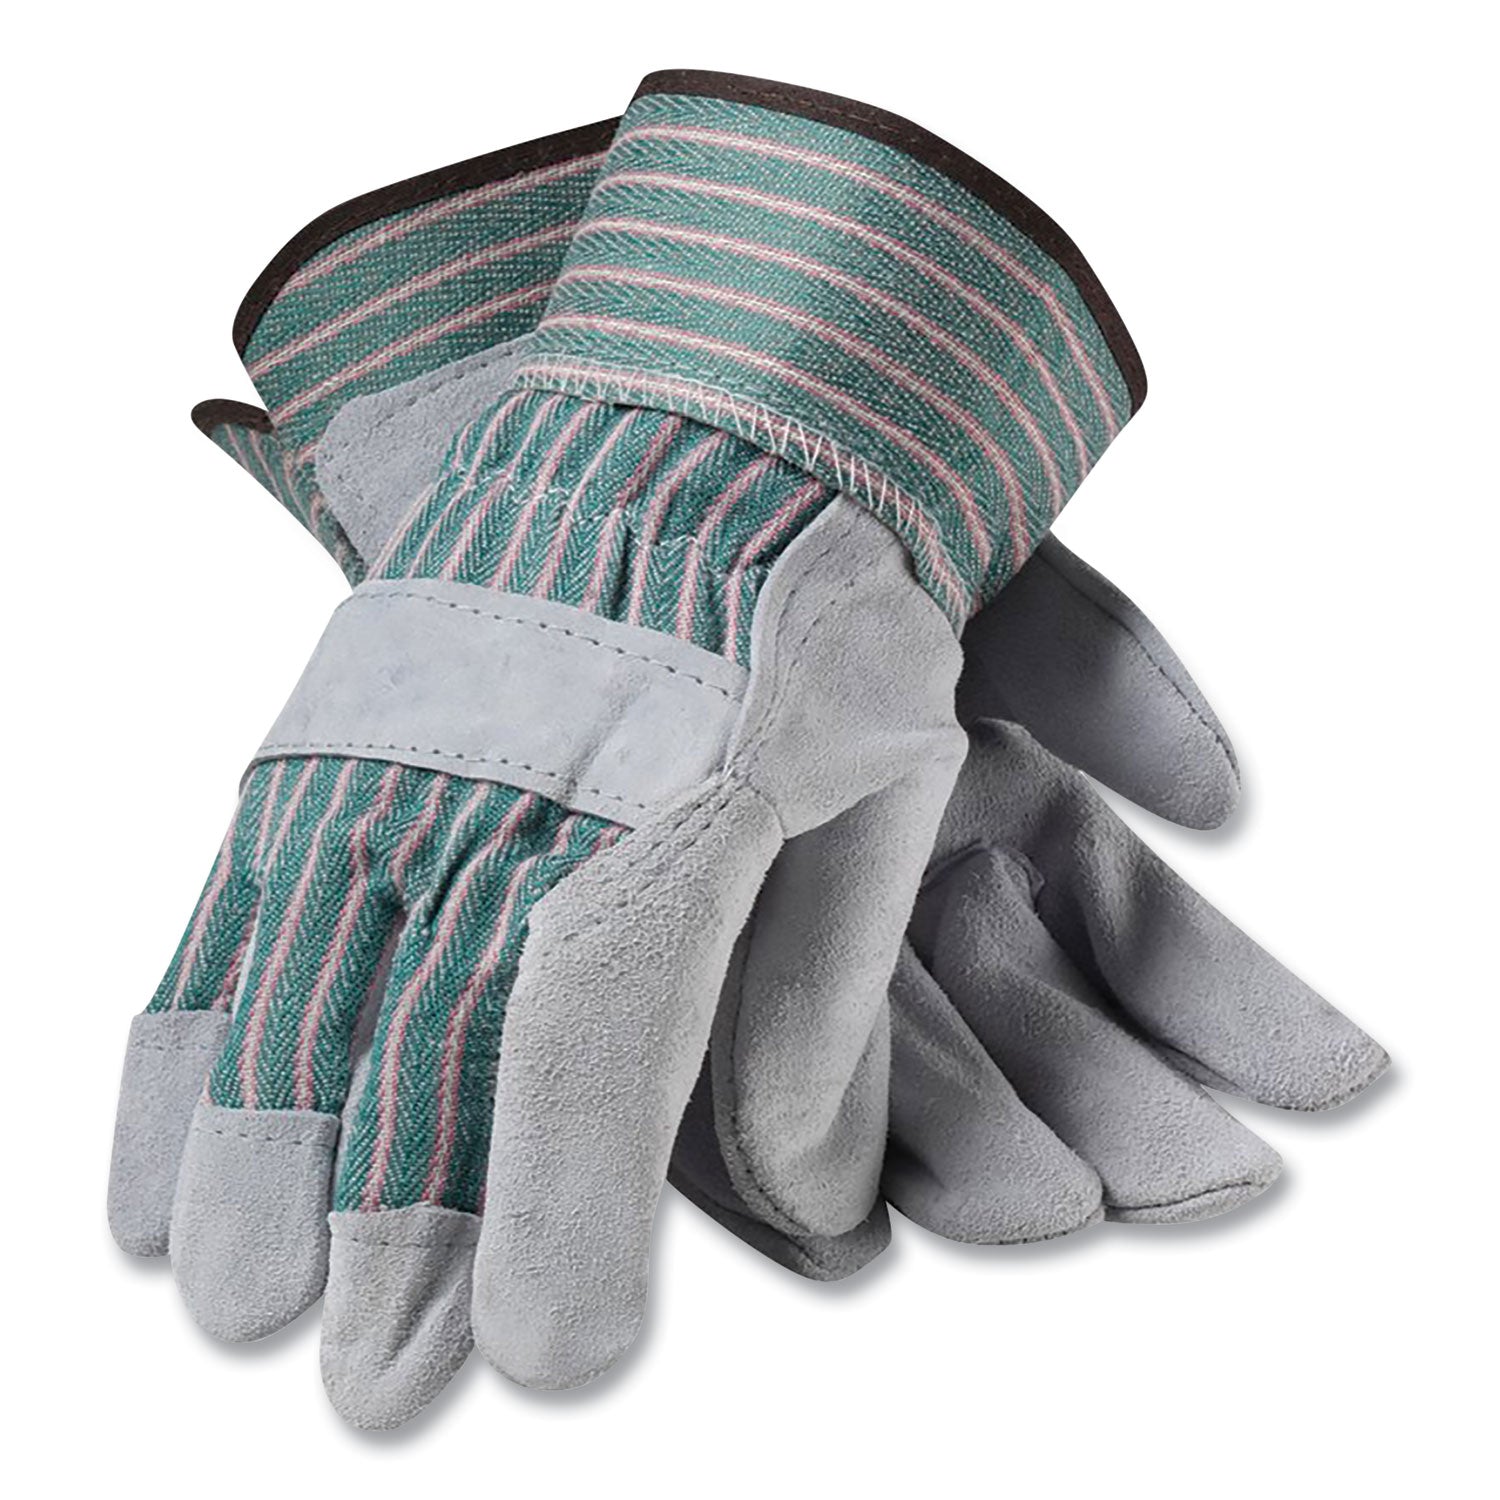 bronze-series-leather-fabric-work-gloves-large-size-9-gray-green-12-pairs_pid836563l - 1